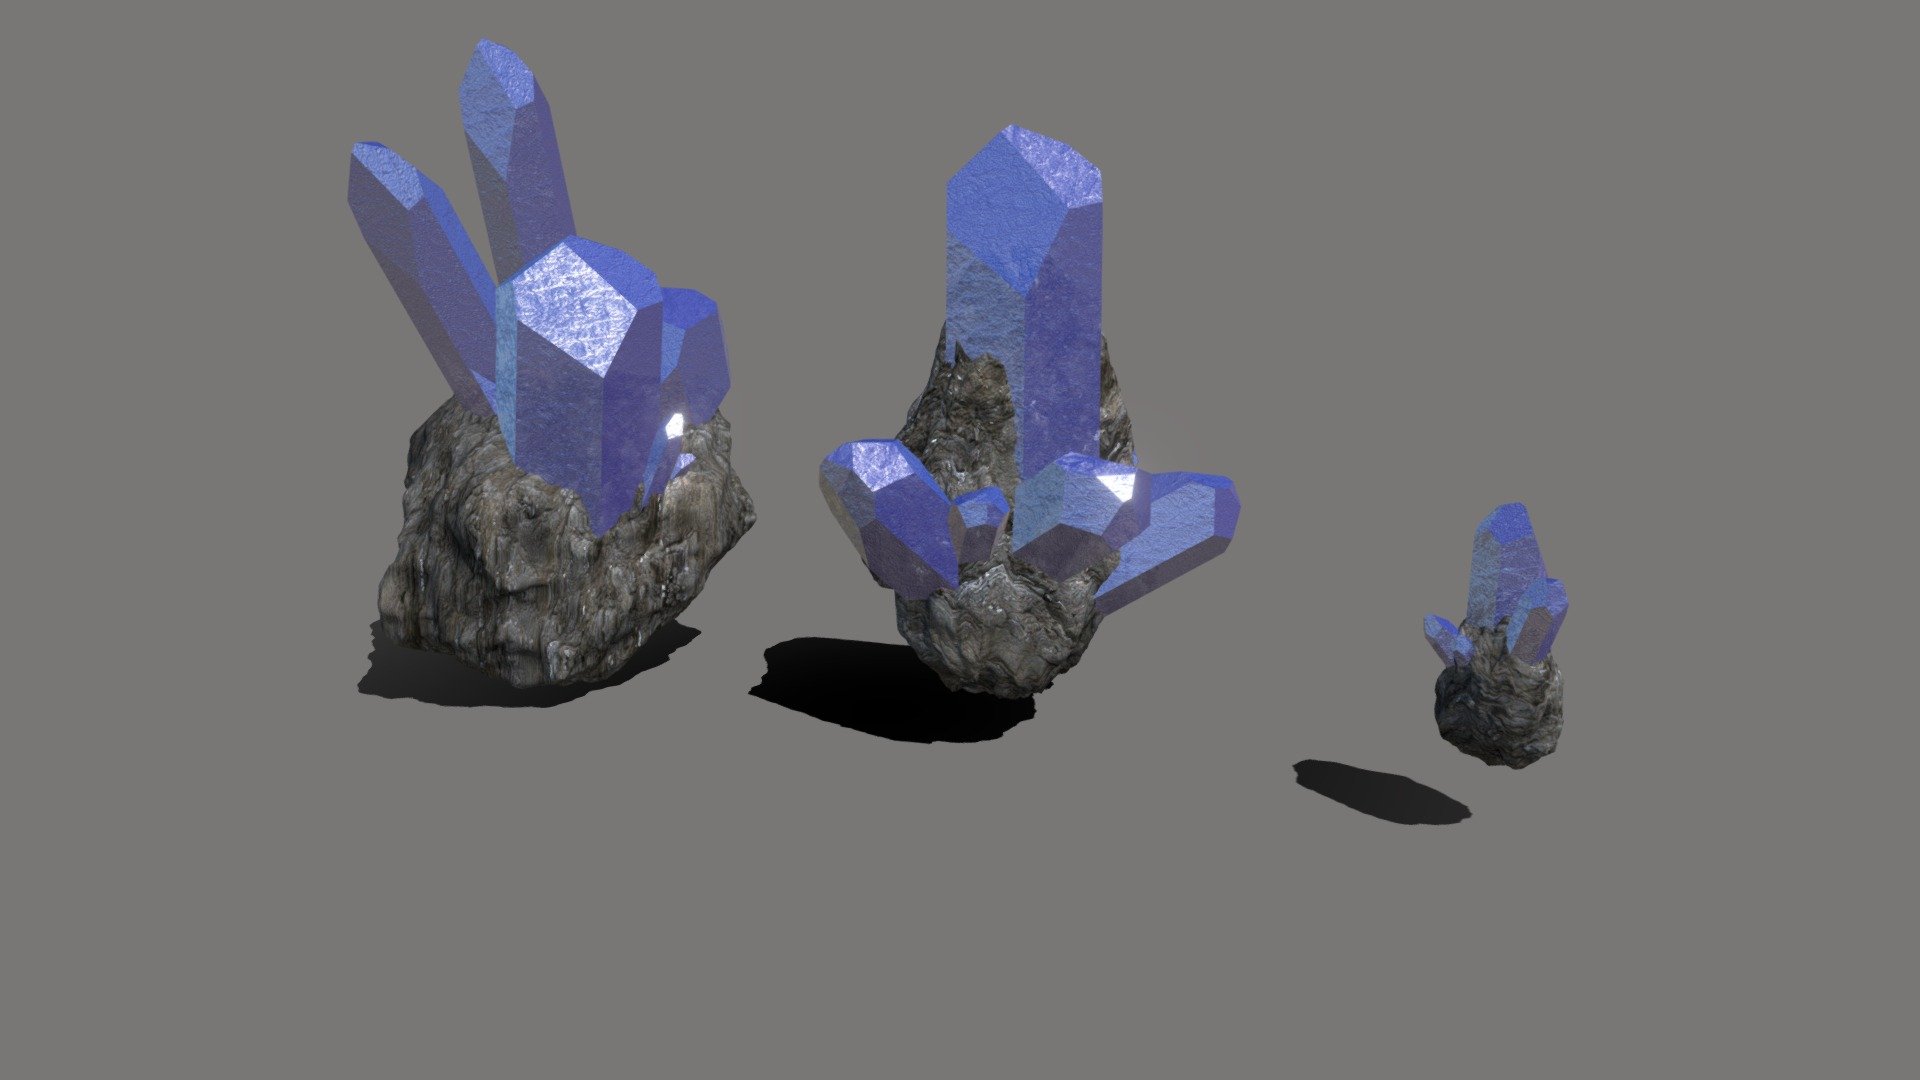 High poly Set crystals in the breed. Created with 3Ds max2018. Export in FBX. Model have diffuse, opacity, normal texture maps 3d model